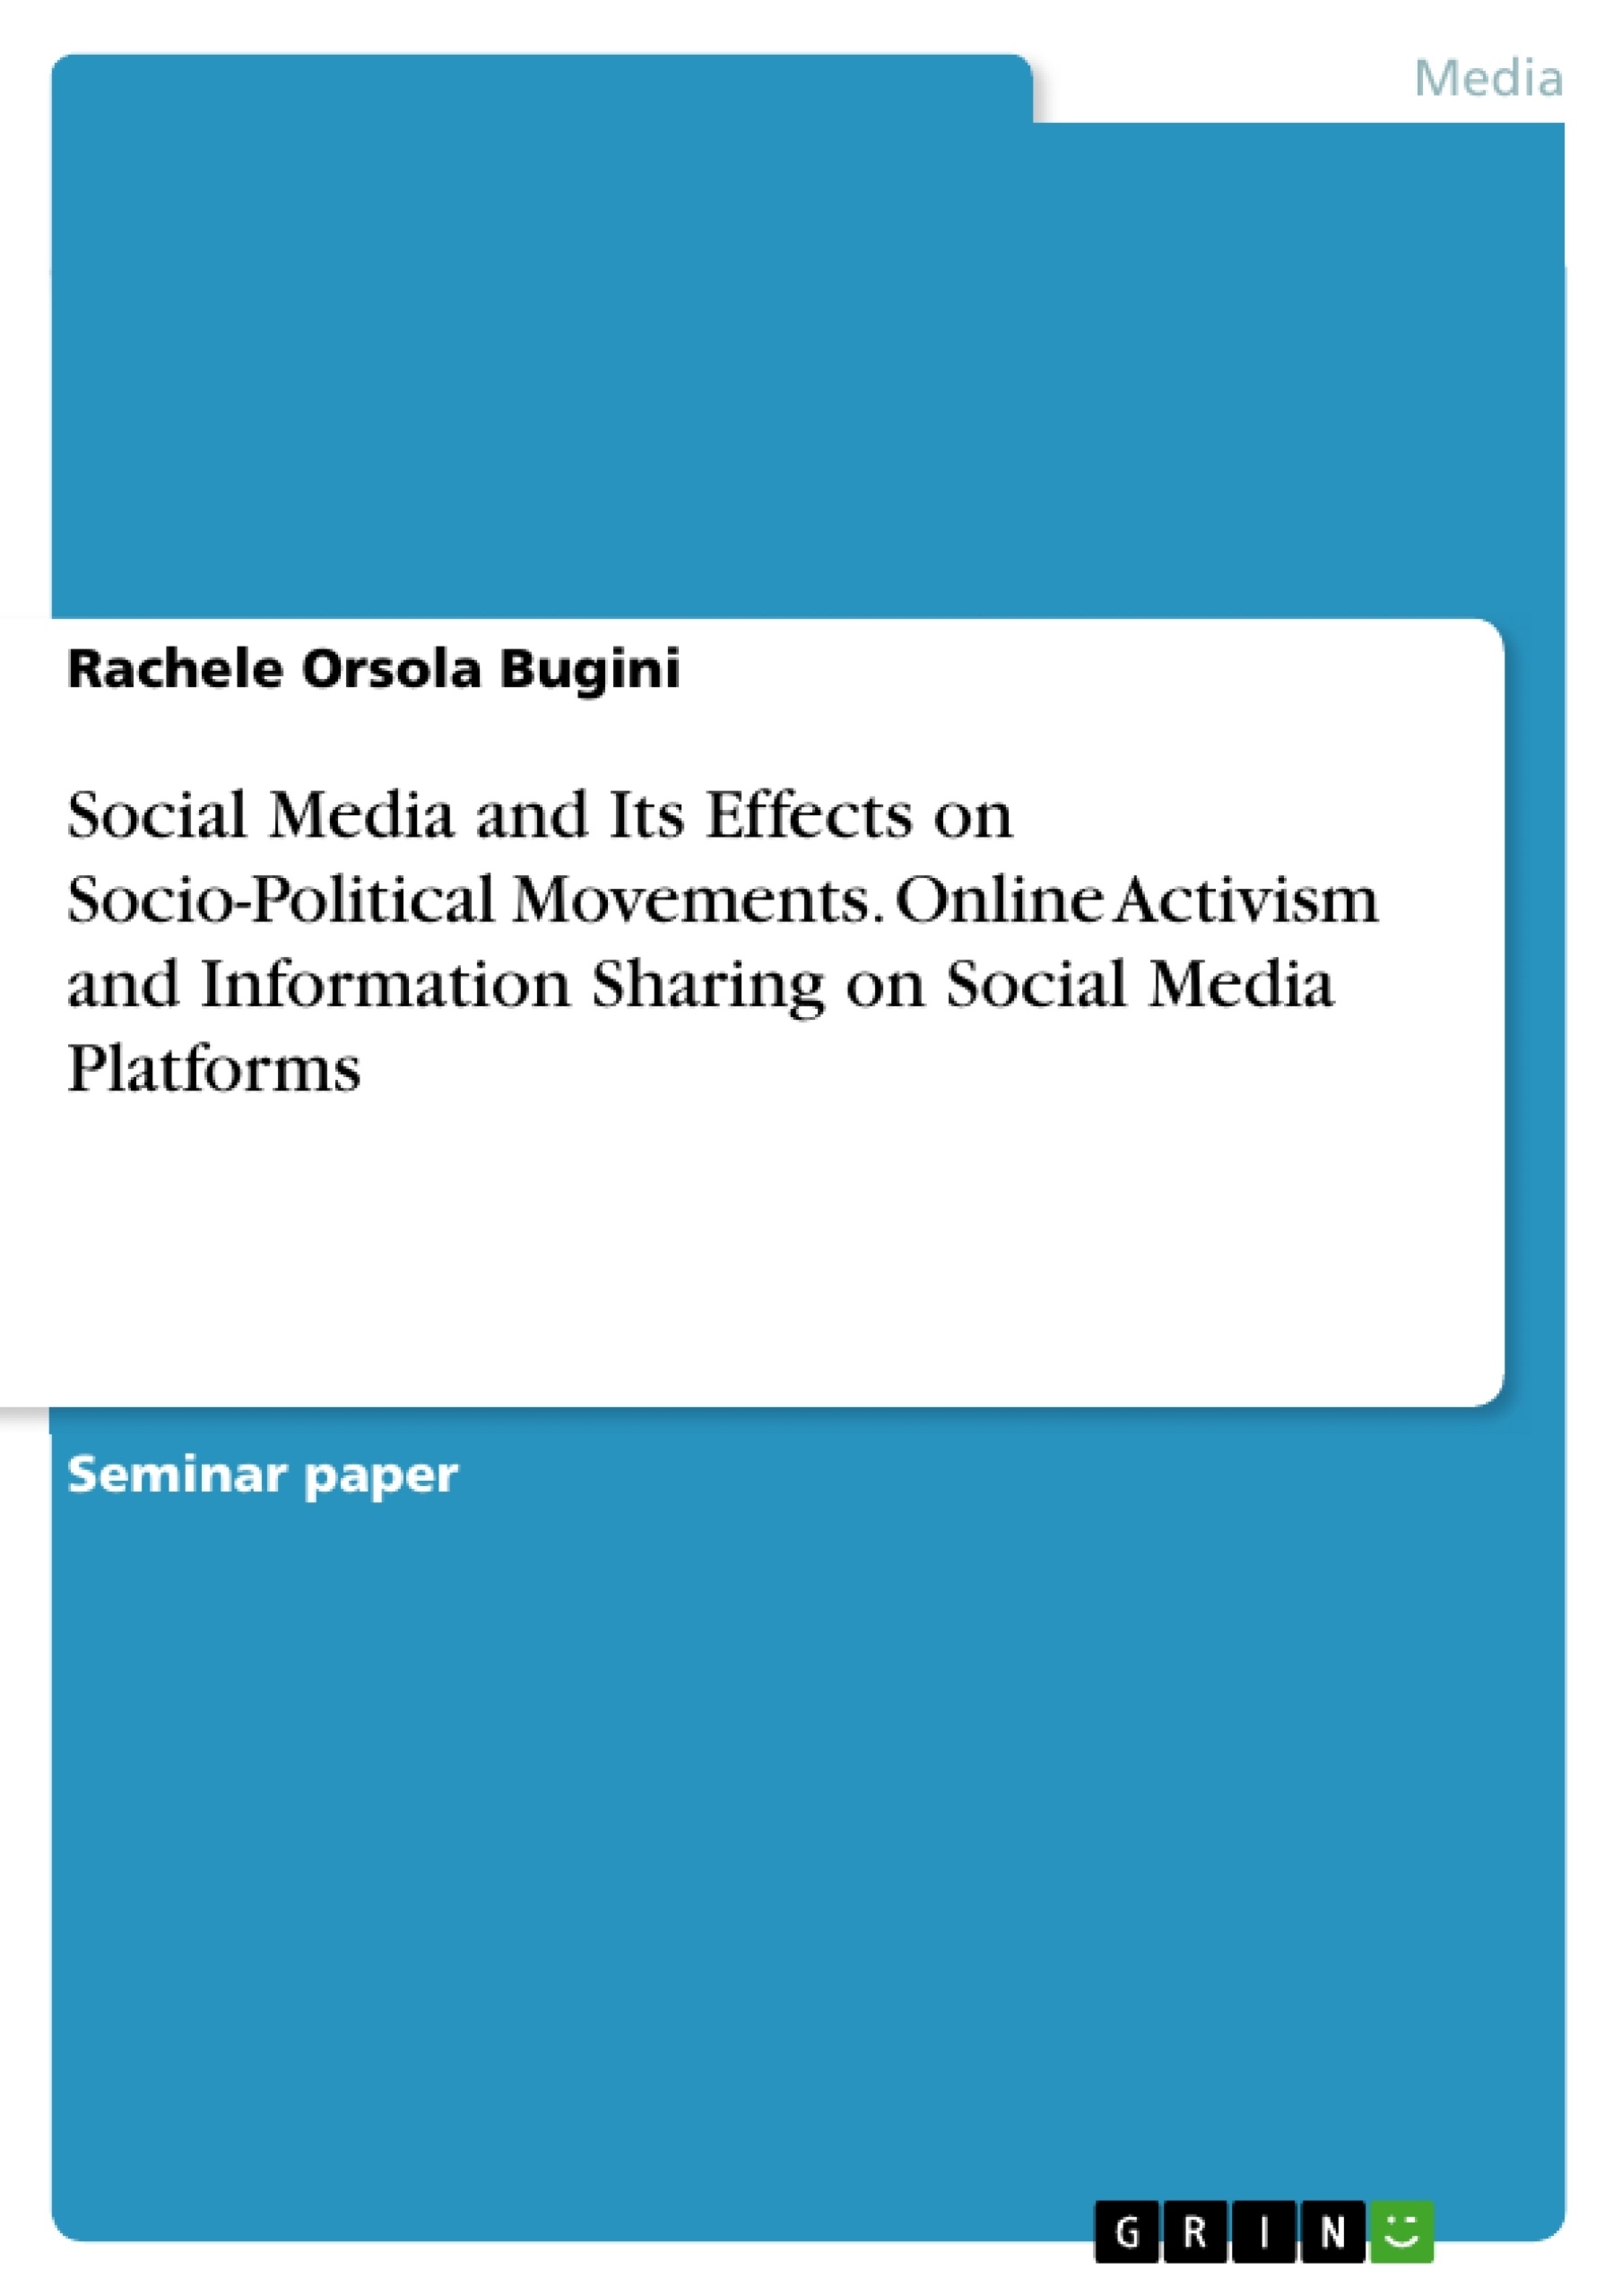 Title: Social Media and Its Effects on Socio-Political Movements. Online Activism and Information Sharing on Social Media Platforms